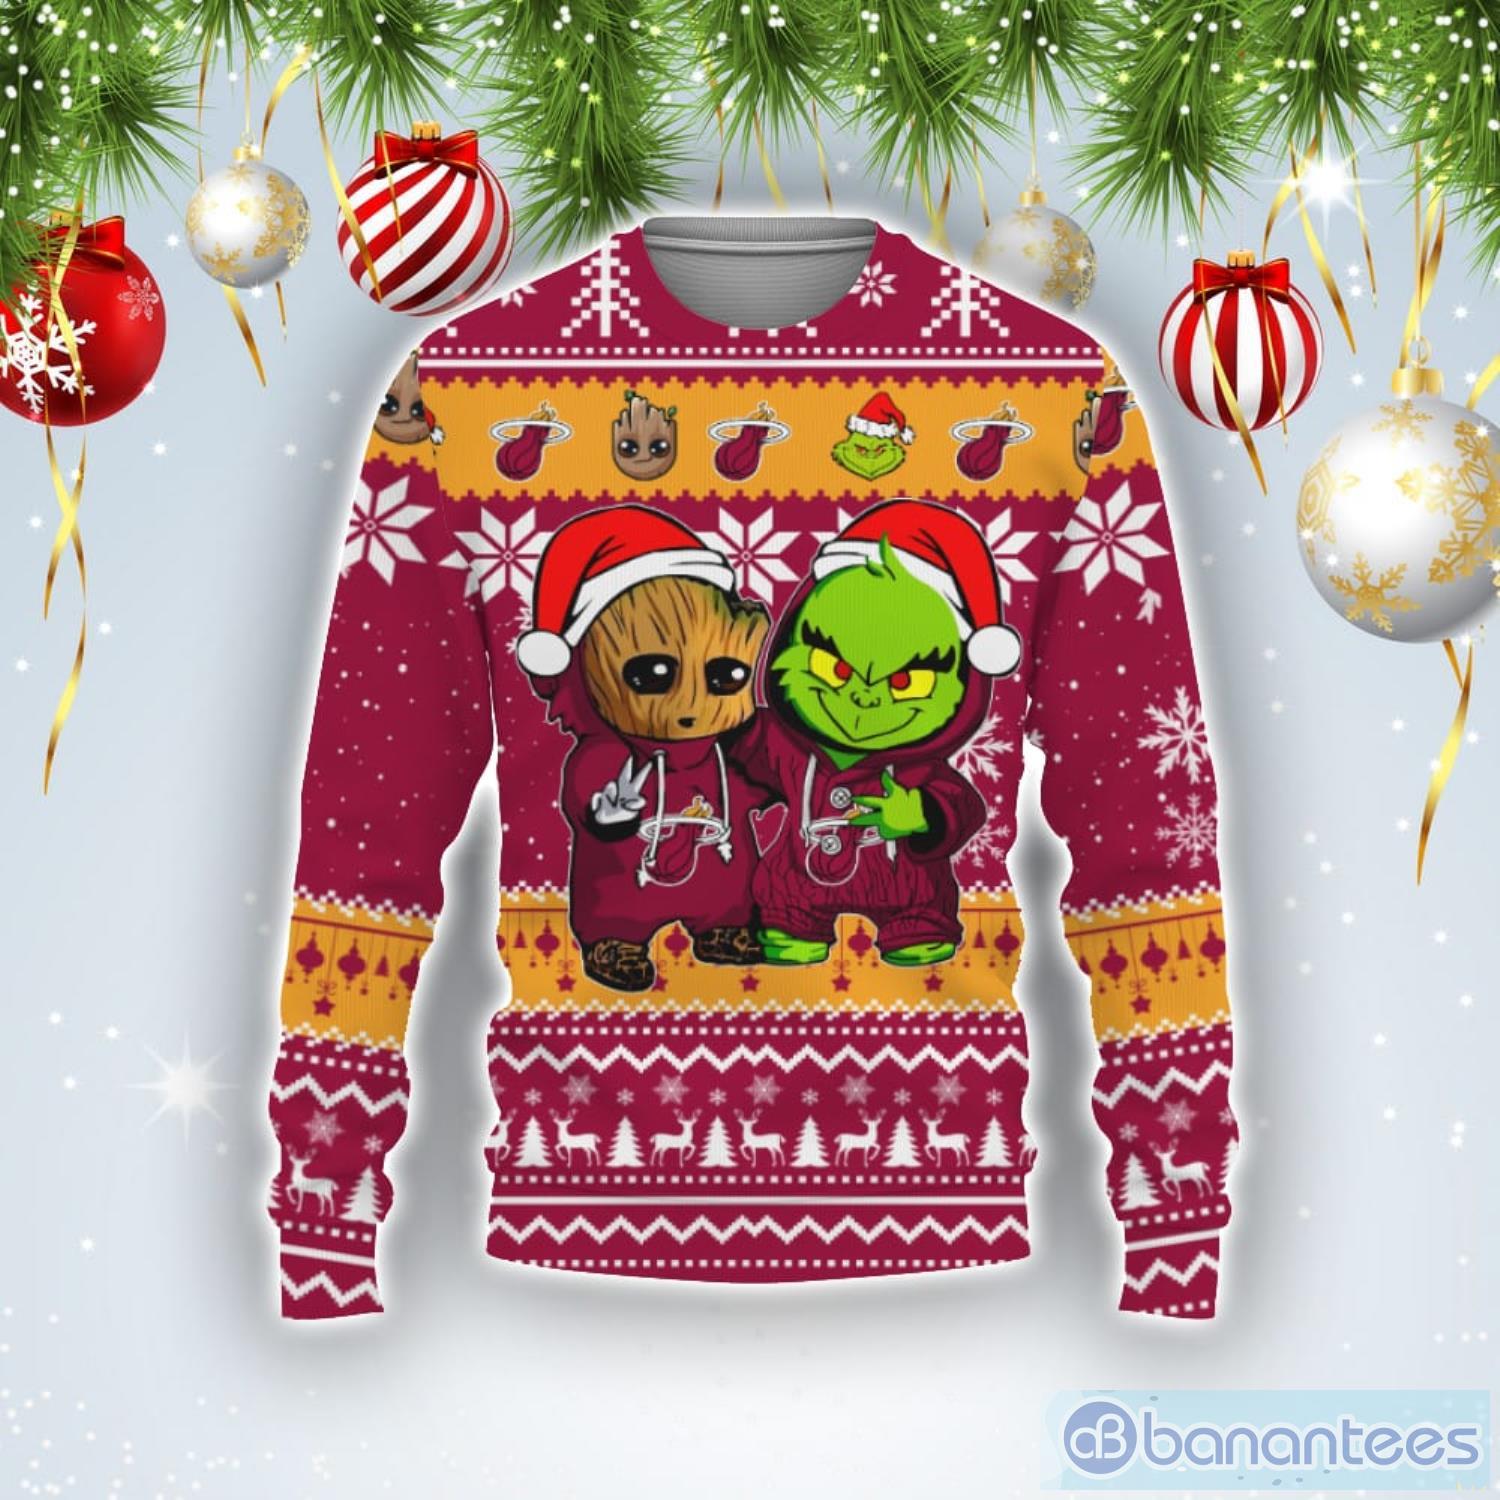 Miami Heat Baby Groot And Grinch Best Friends Football American Ugly Christmas Sweater Product Photo 1